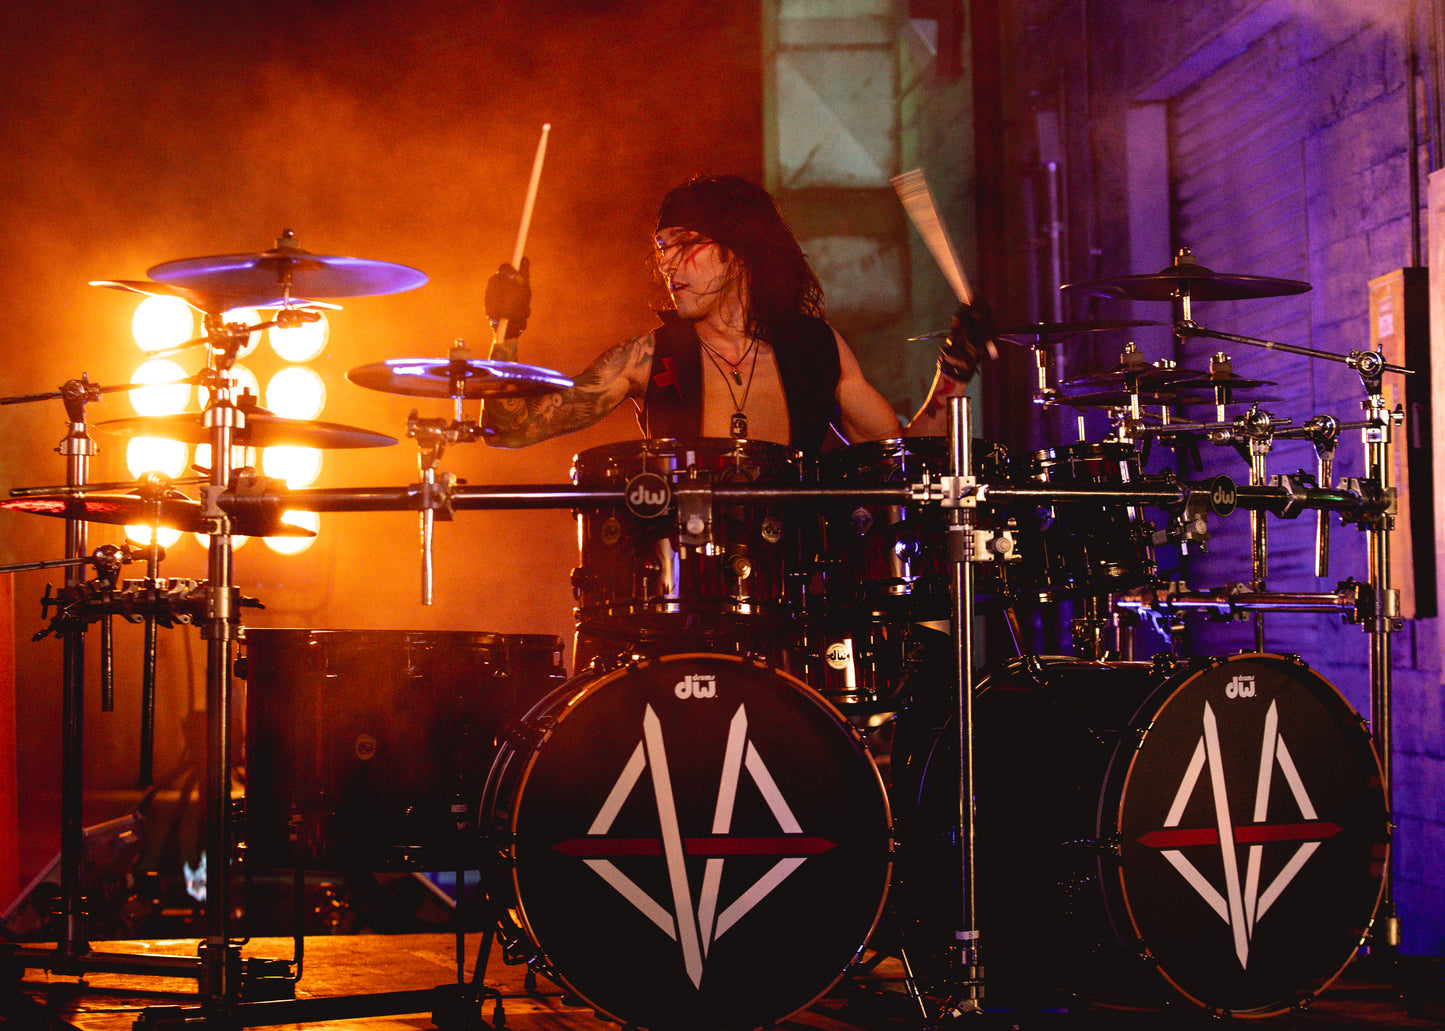 Bass Drum Head Featured in the Scarlet Cross Music video